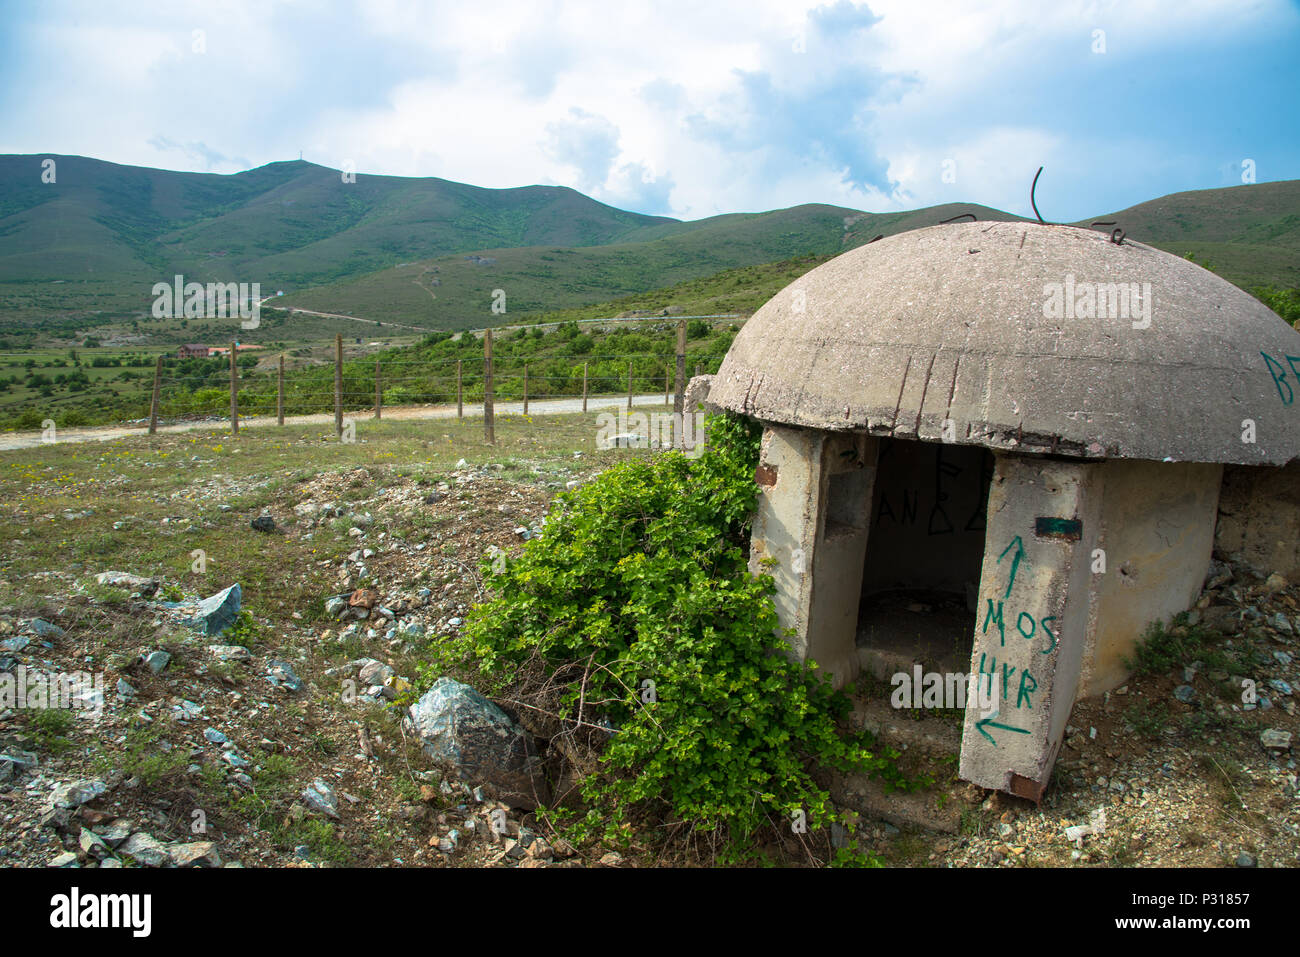 famous one man bunkers for defending the country, Albania Stock Photo